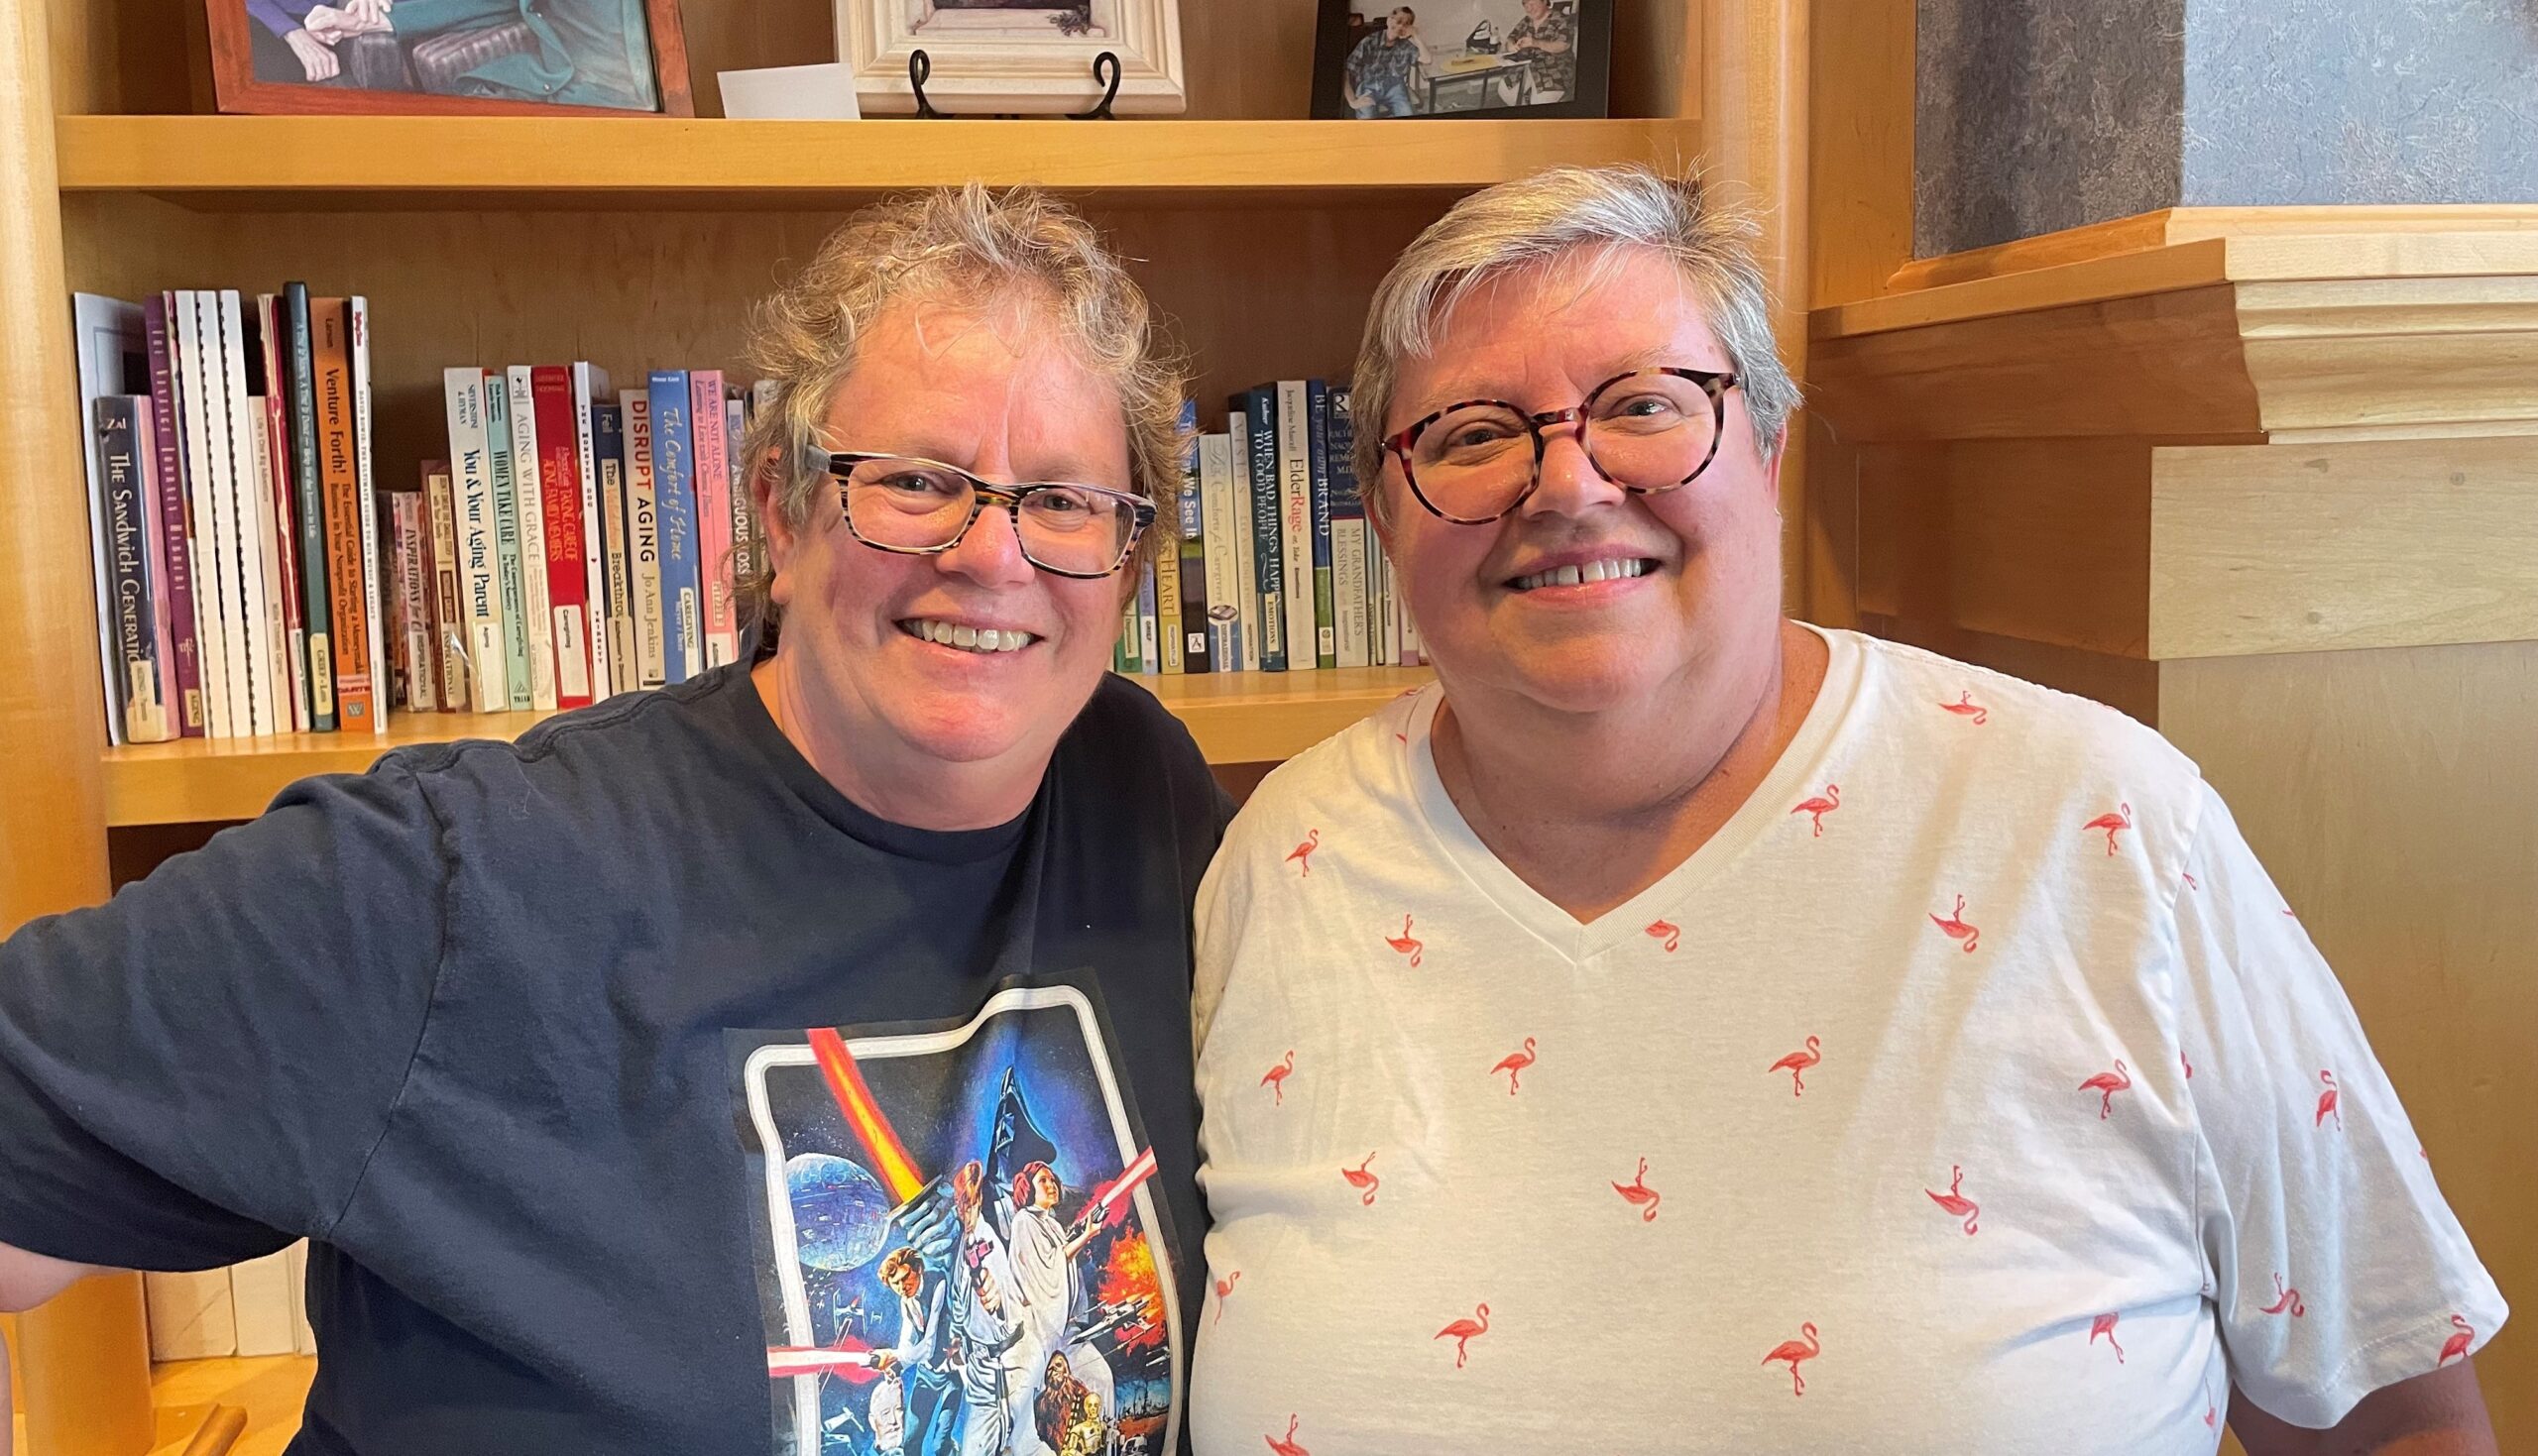 DARTS Jan and her wife Jacquie, who identify as members of the LGBTQ+ community